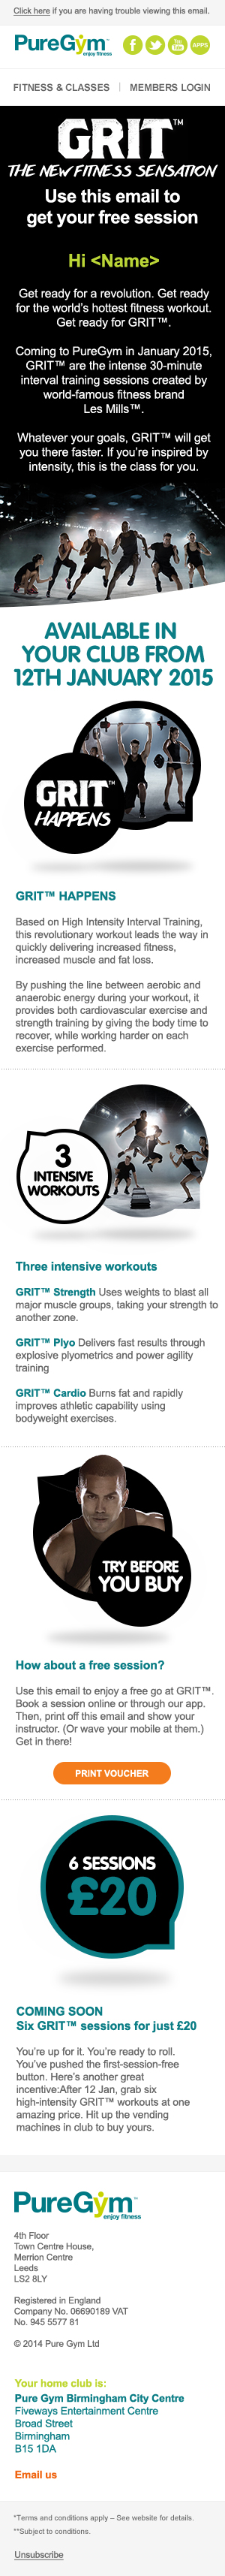 PureGym: Marketing - GRIT Email - Mobile